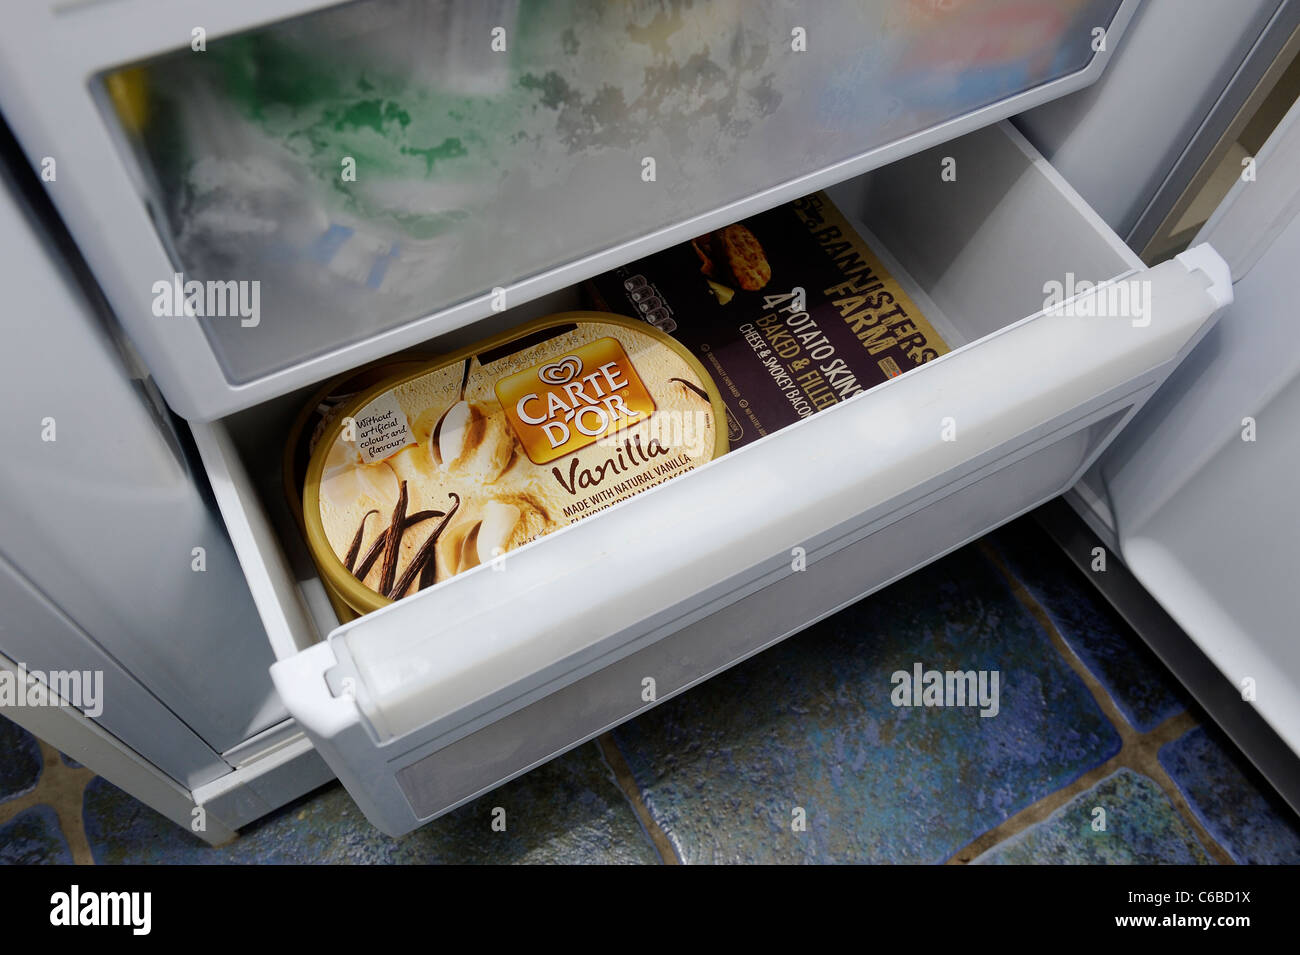 drawer of a domestic freezer with ice cream inside england uk Stock Photo